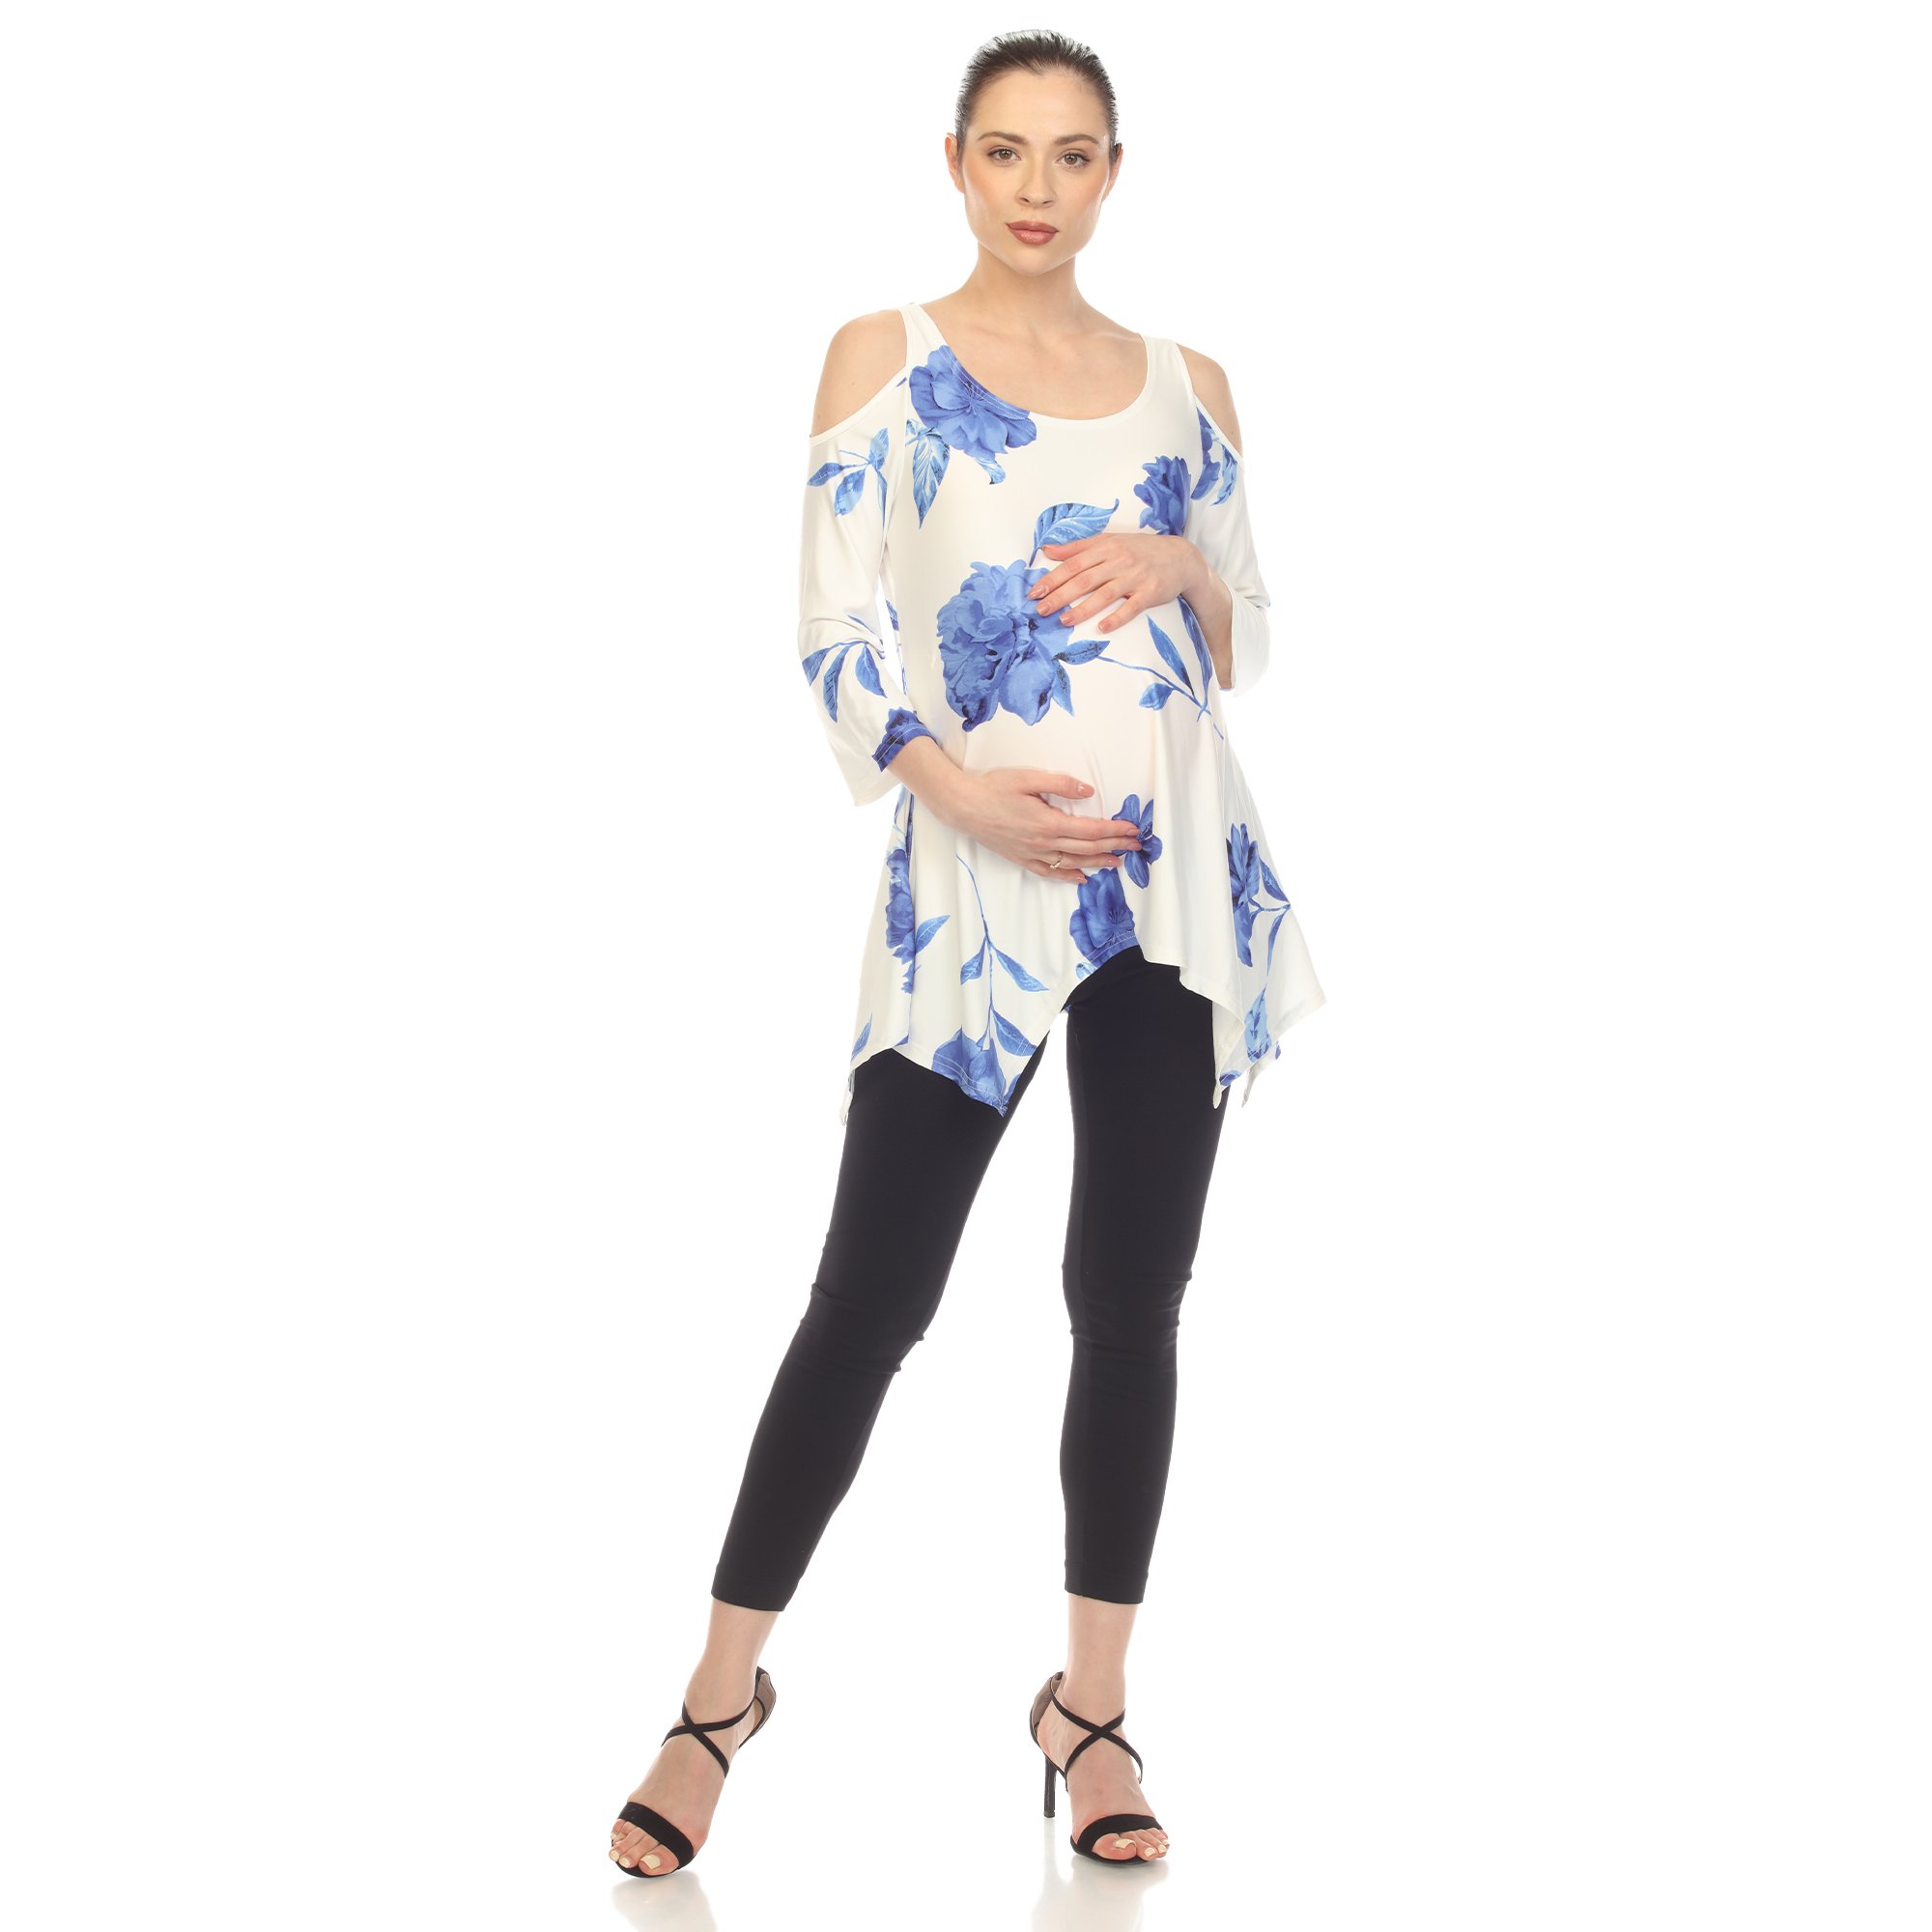 White Mark Women's Maternity Floral Cold Shoulder Tunic Top - White/Blue, Small